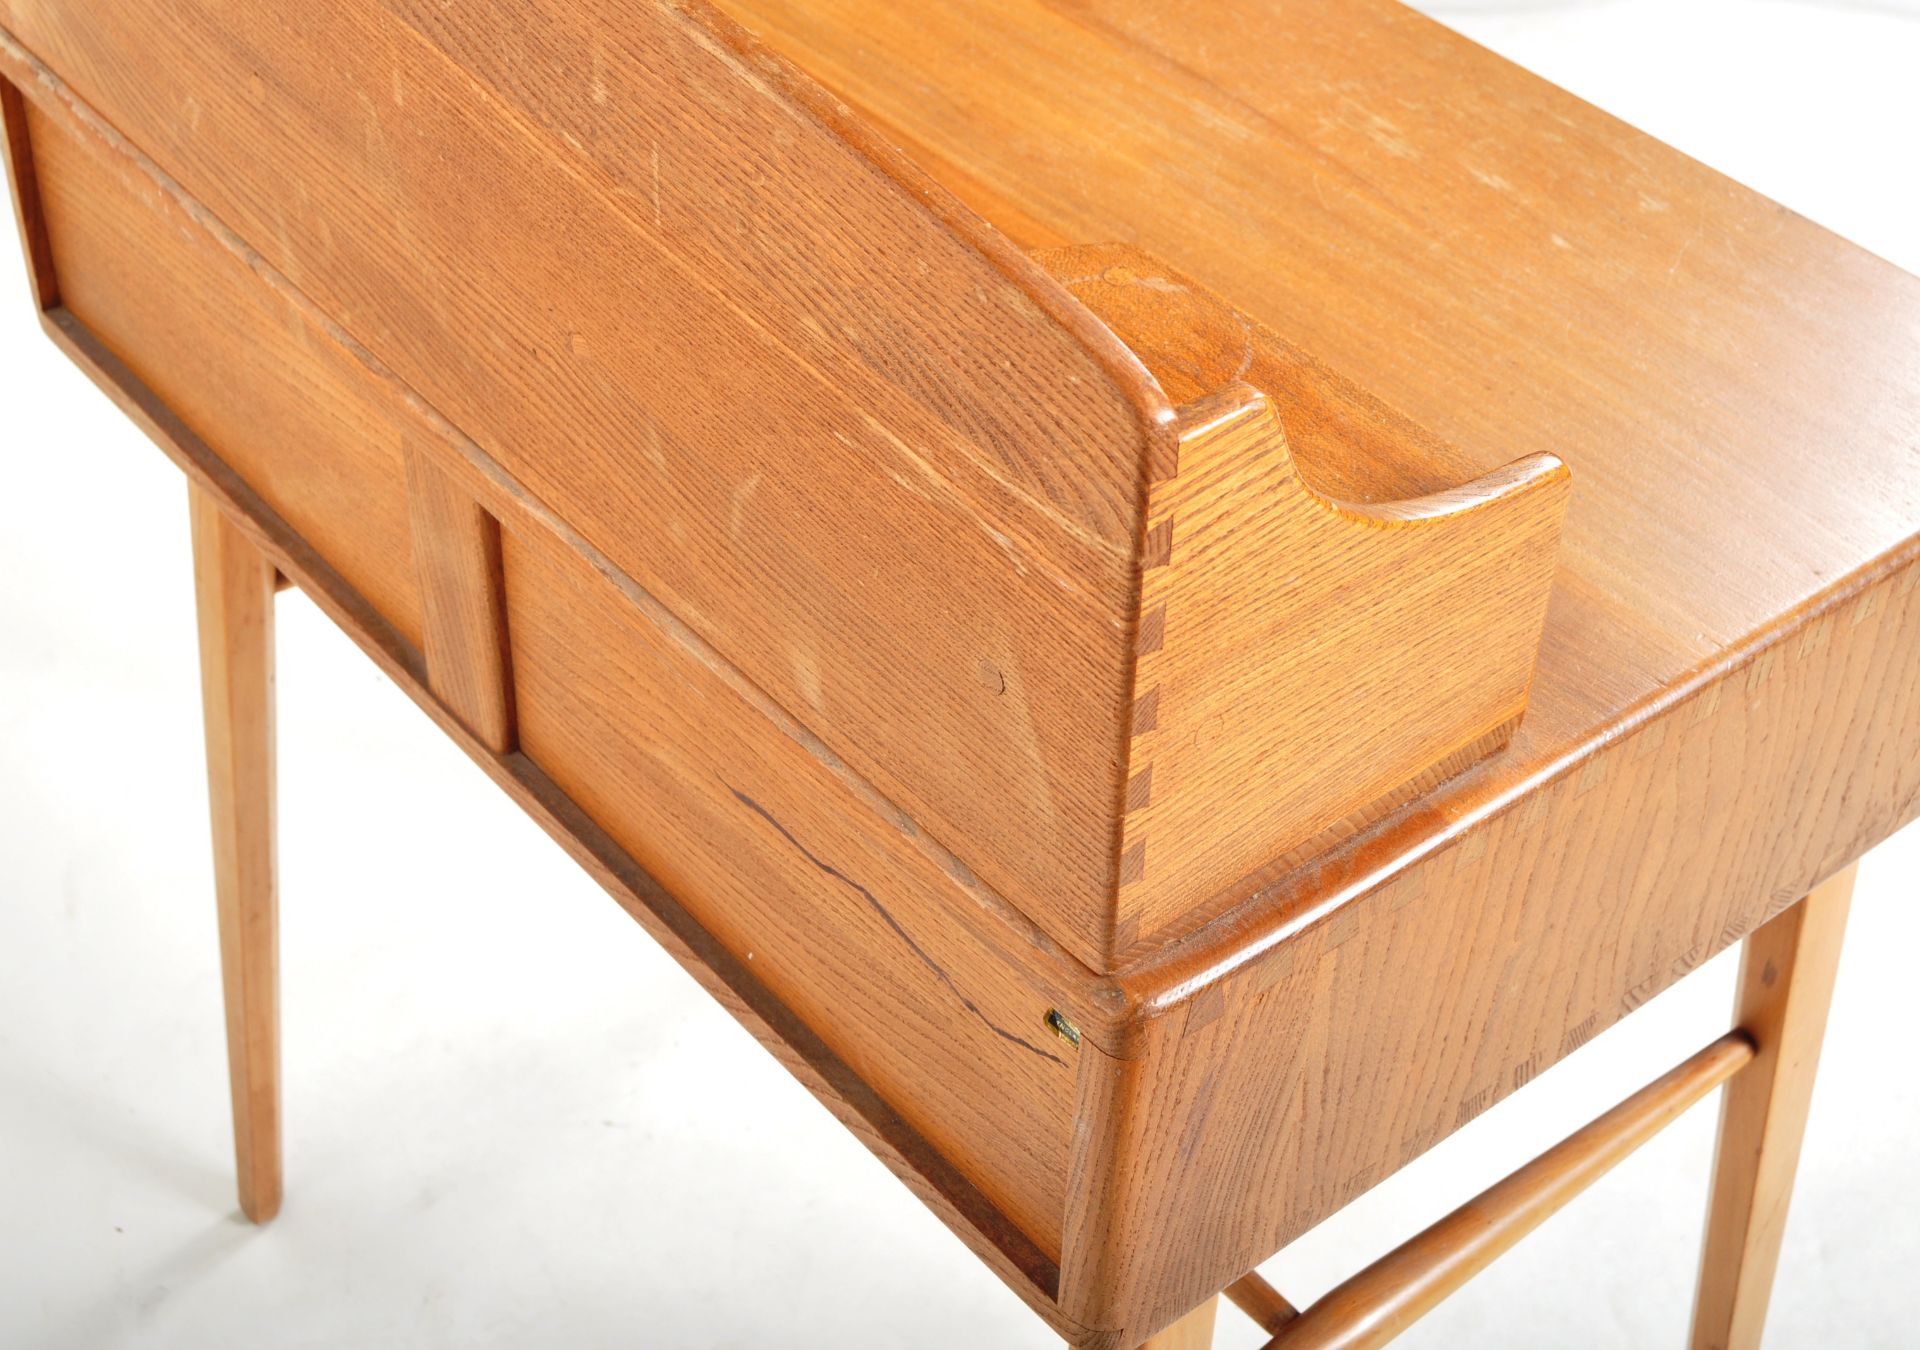 ERCOL WINDSOR MODEL 479 BEECH AND ELM WOOD DESK BY LUCIAN ERCOLANI - Image 6 of 7